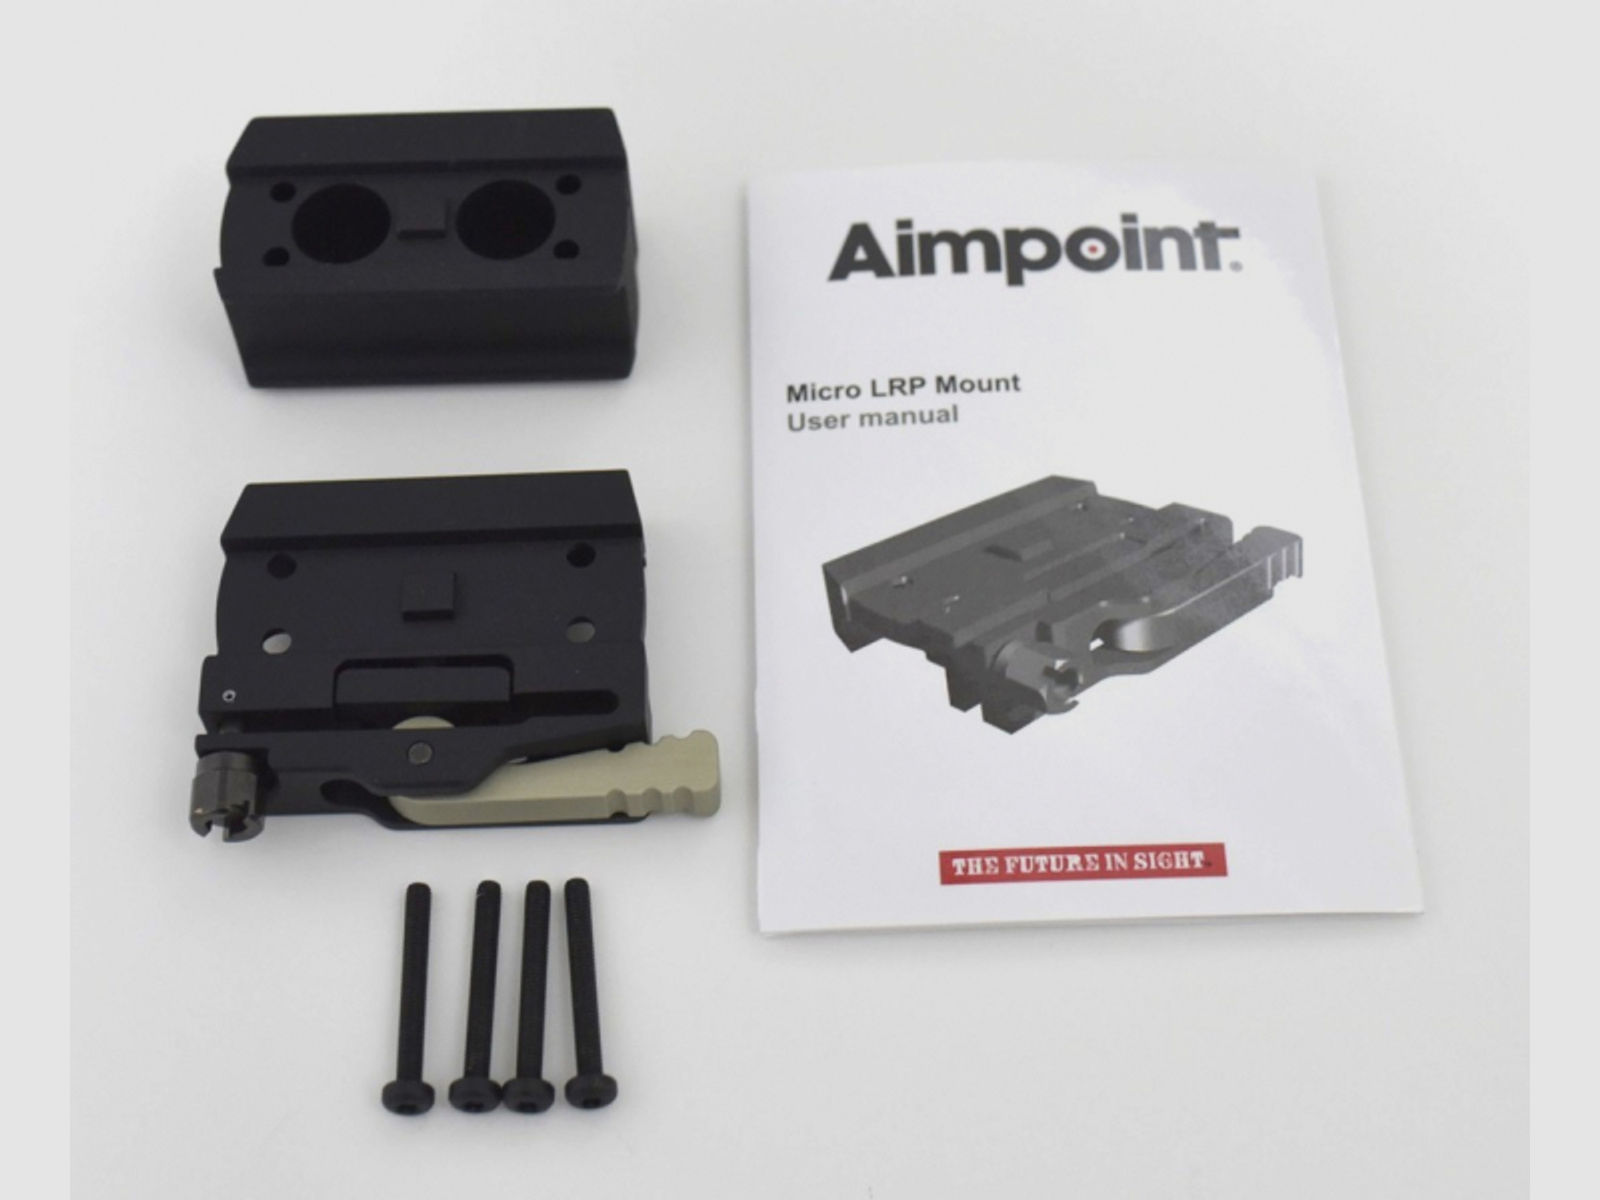 Original Aimpoint LRP Lever Picatinny Mount mit 39mm Spacer AR15 Ready für Micro T1/T2/COMP M5